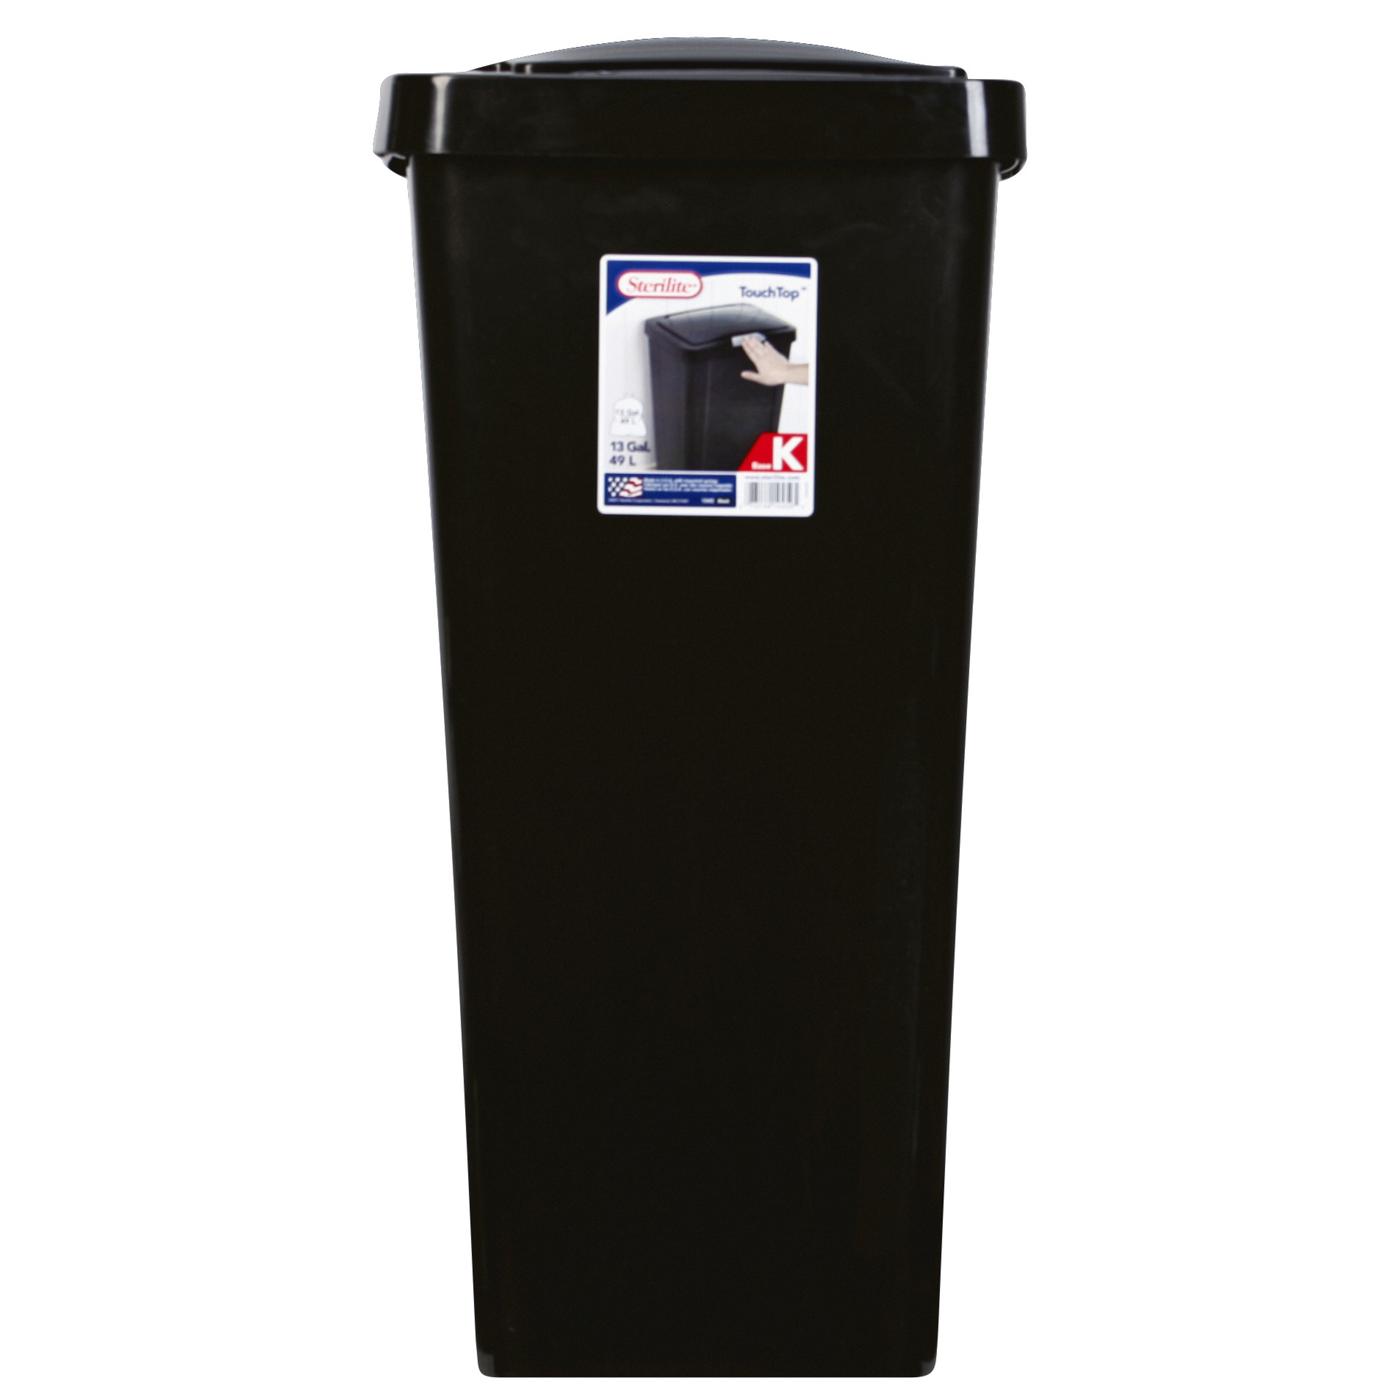 Sterilite Touch-Top Waste Basket - Black; image 3 of 3